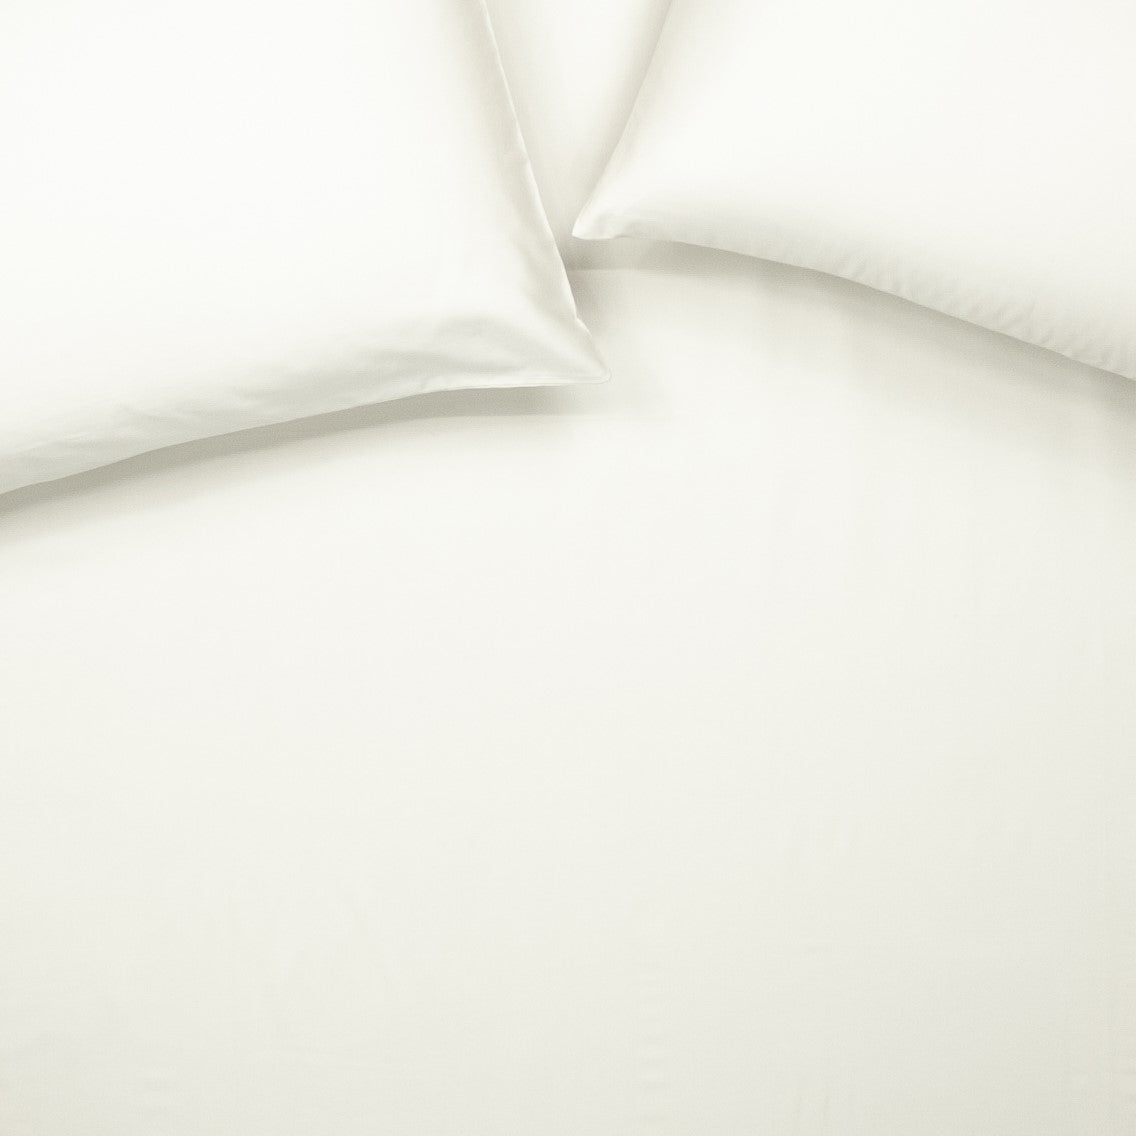 Birds eye view of organic cotton fitted sheet with pillowcases in warm white